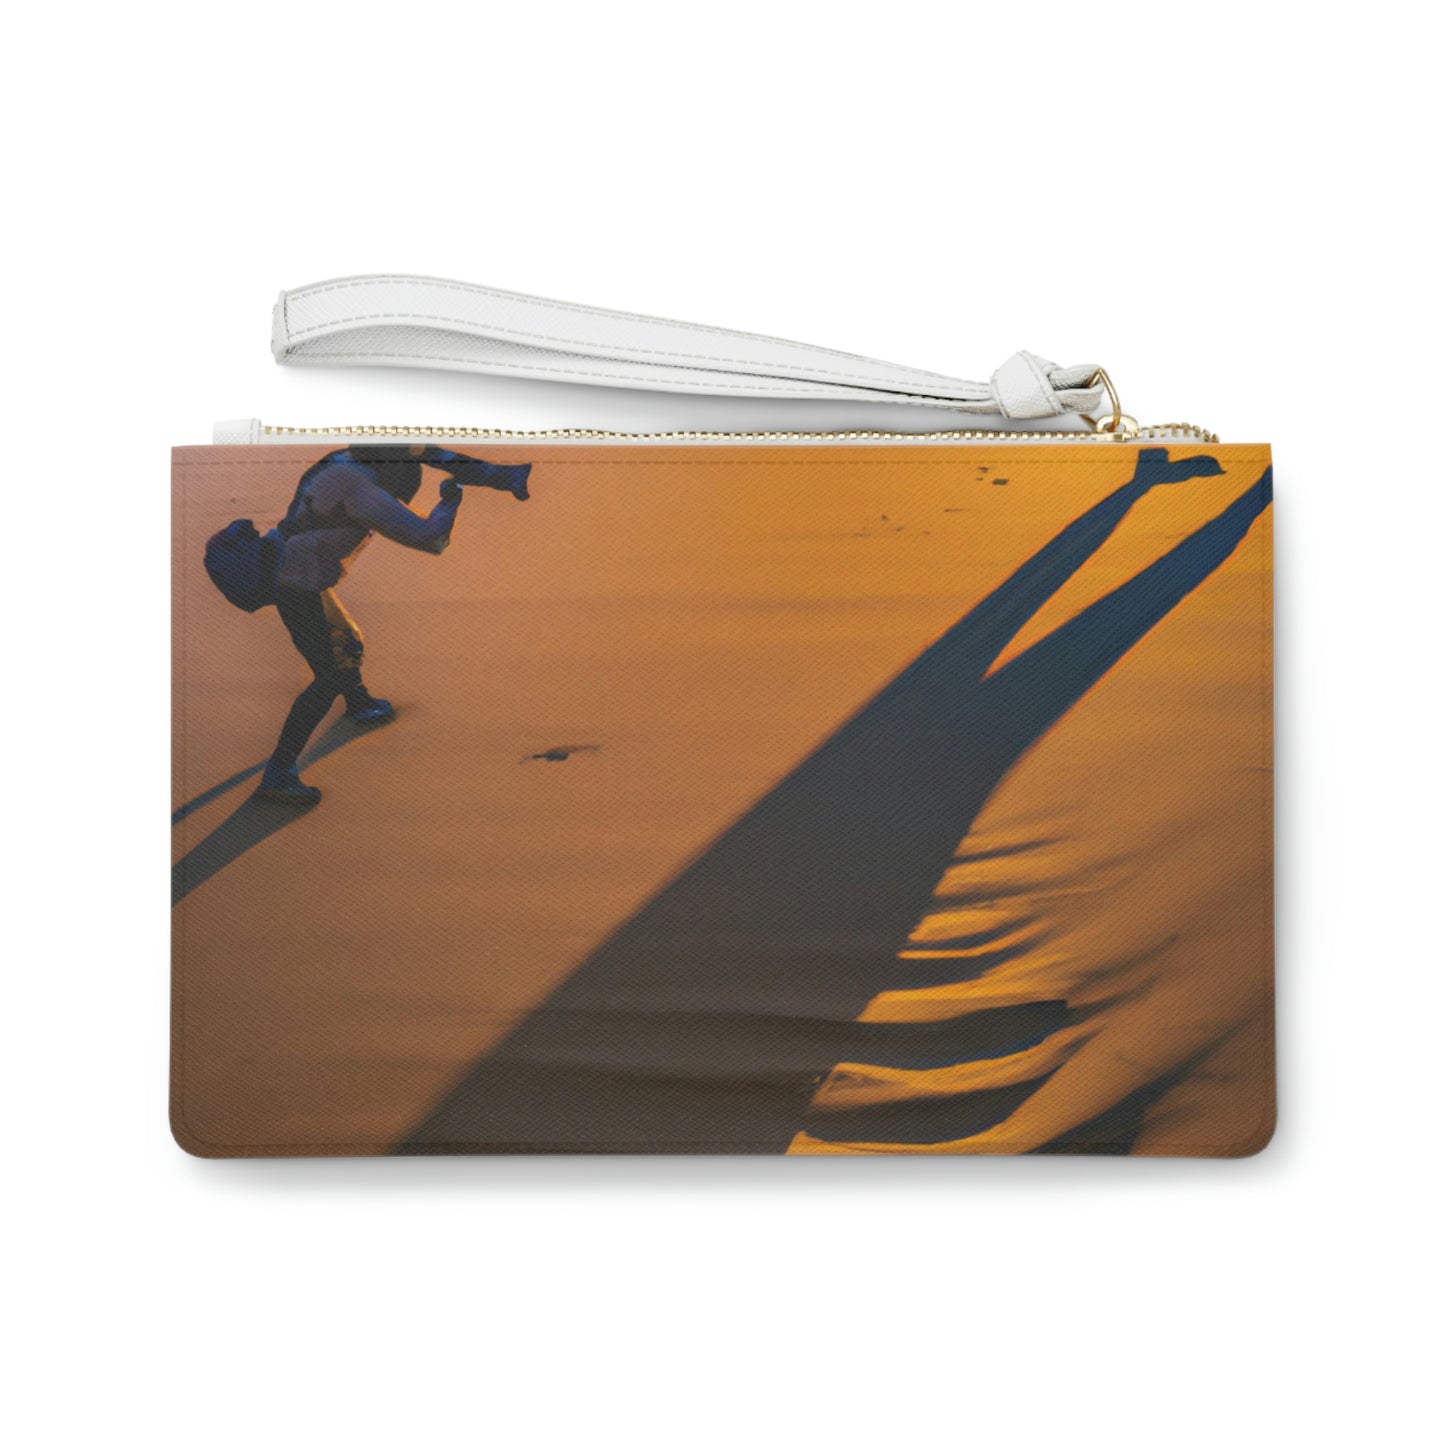 "The Shadow Chaser" - The Alien Clutch Bag